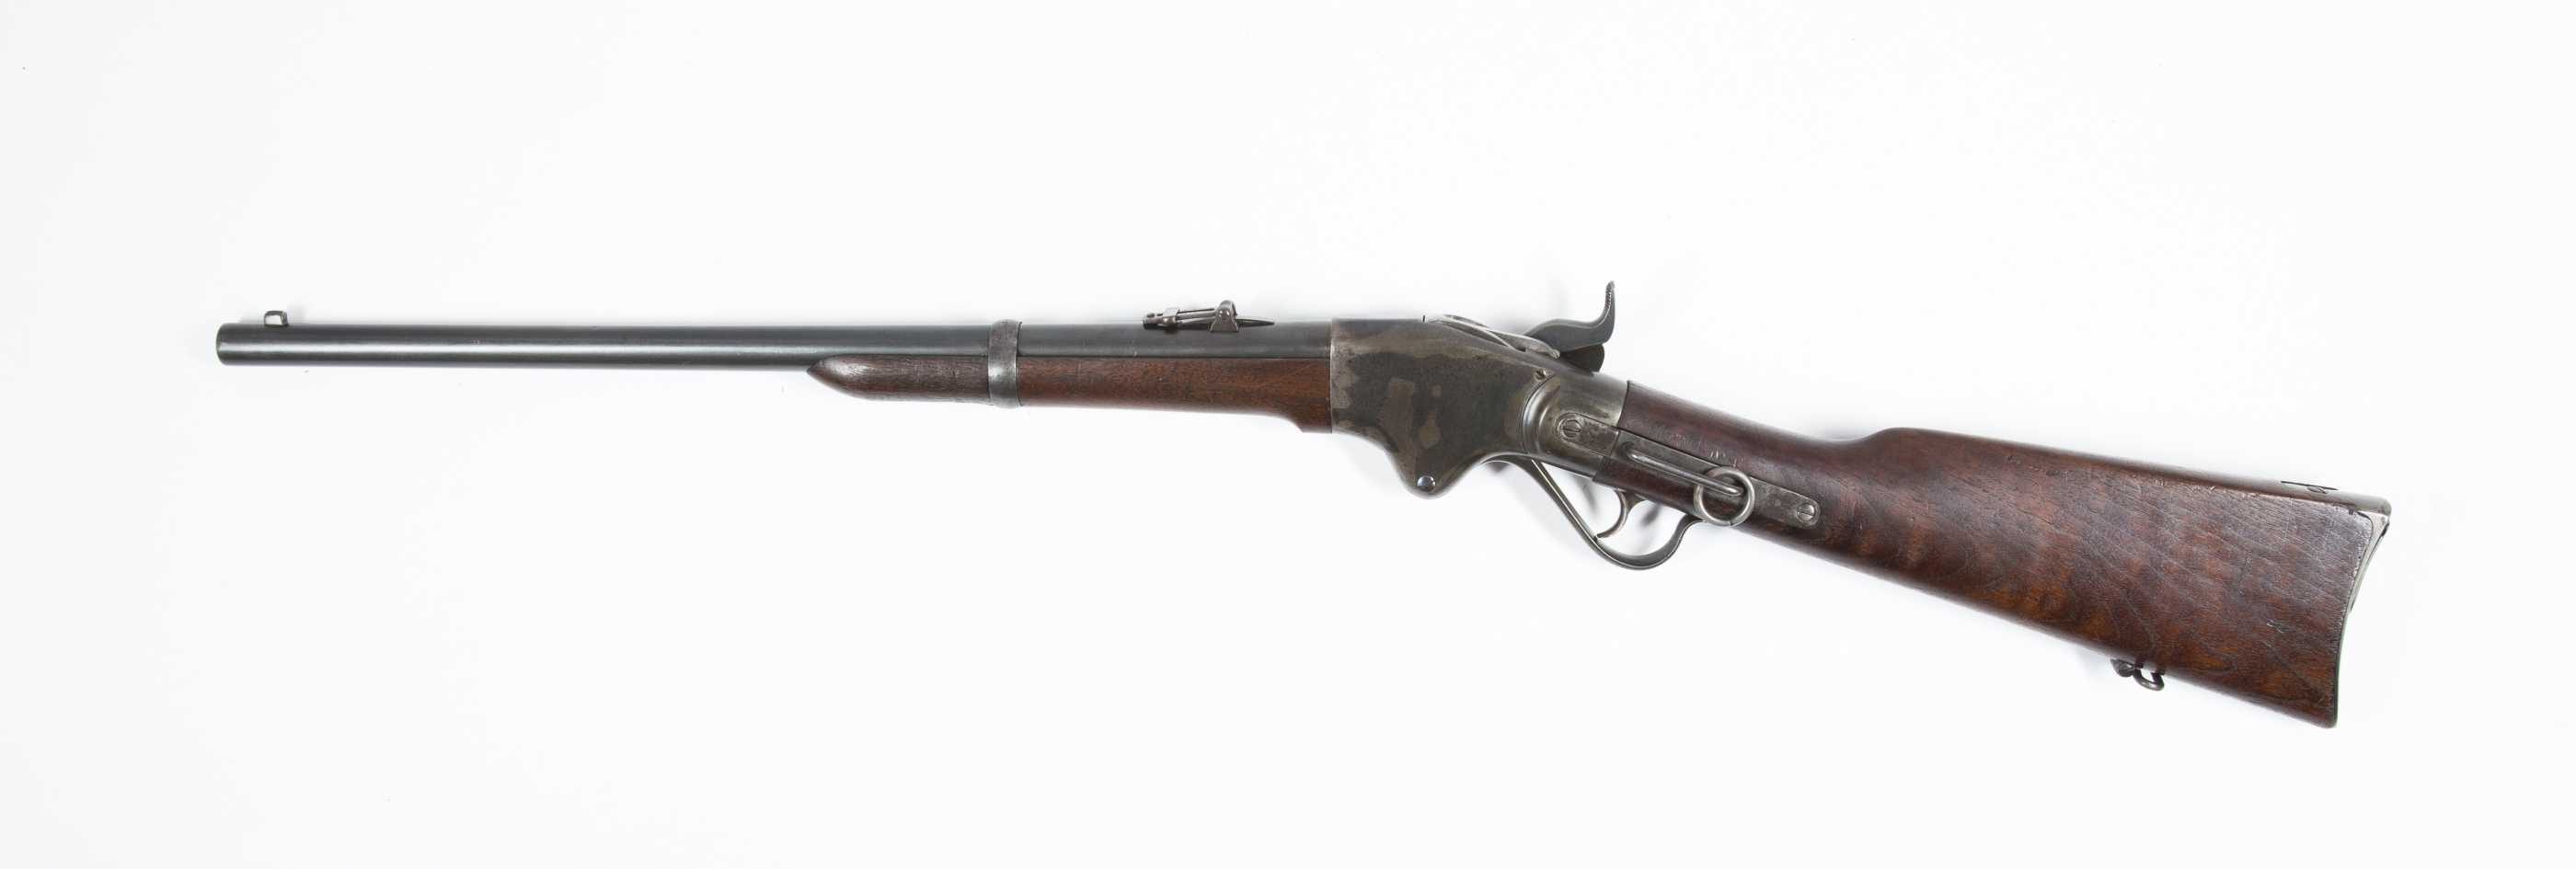 Spencer Repeating Rifle #31